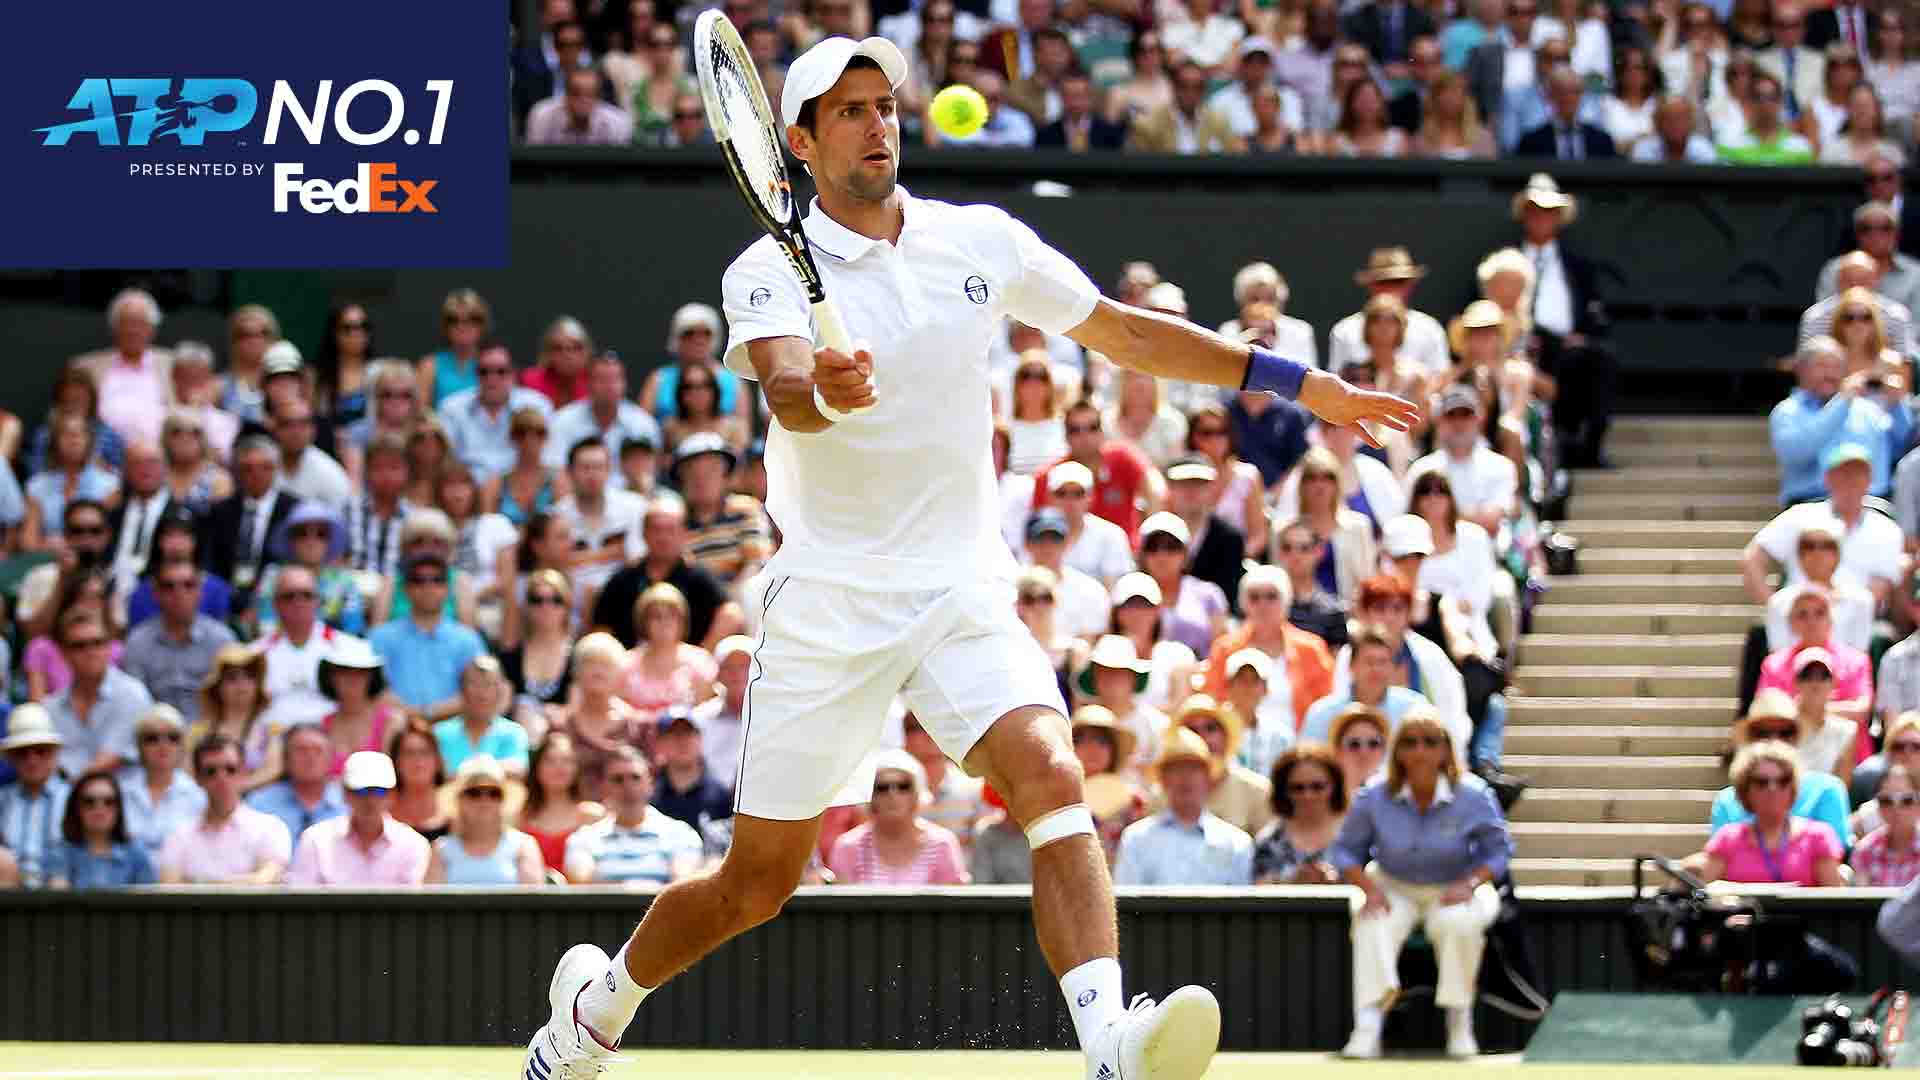 Novak Djokovic climbed to World No. 1 in the FedEx ATP Rankings for the first time after clinching his maiden Wimbledon title in 2011.